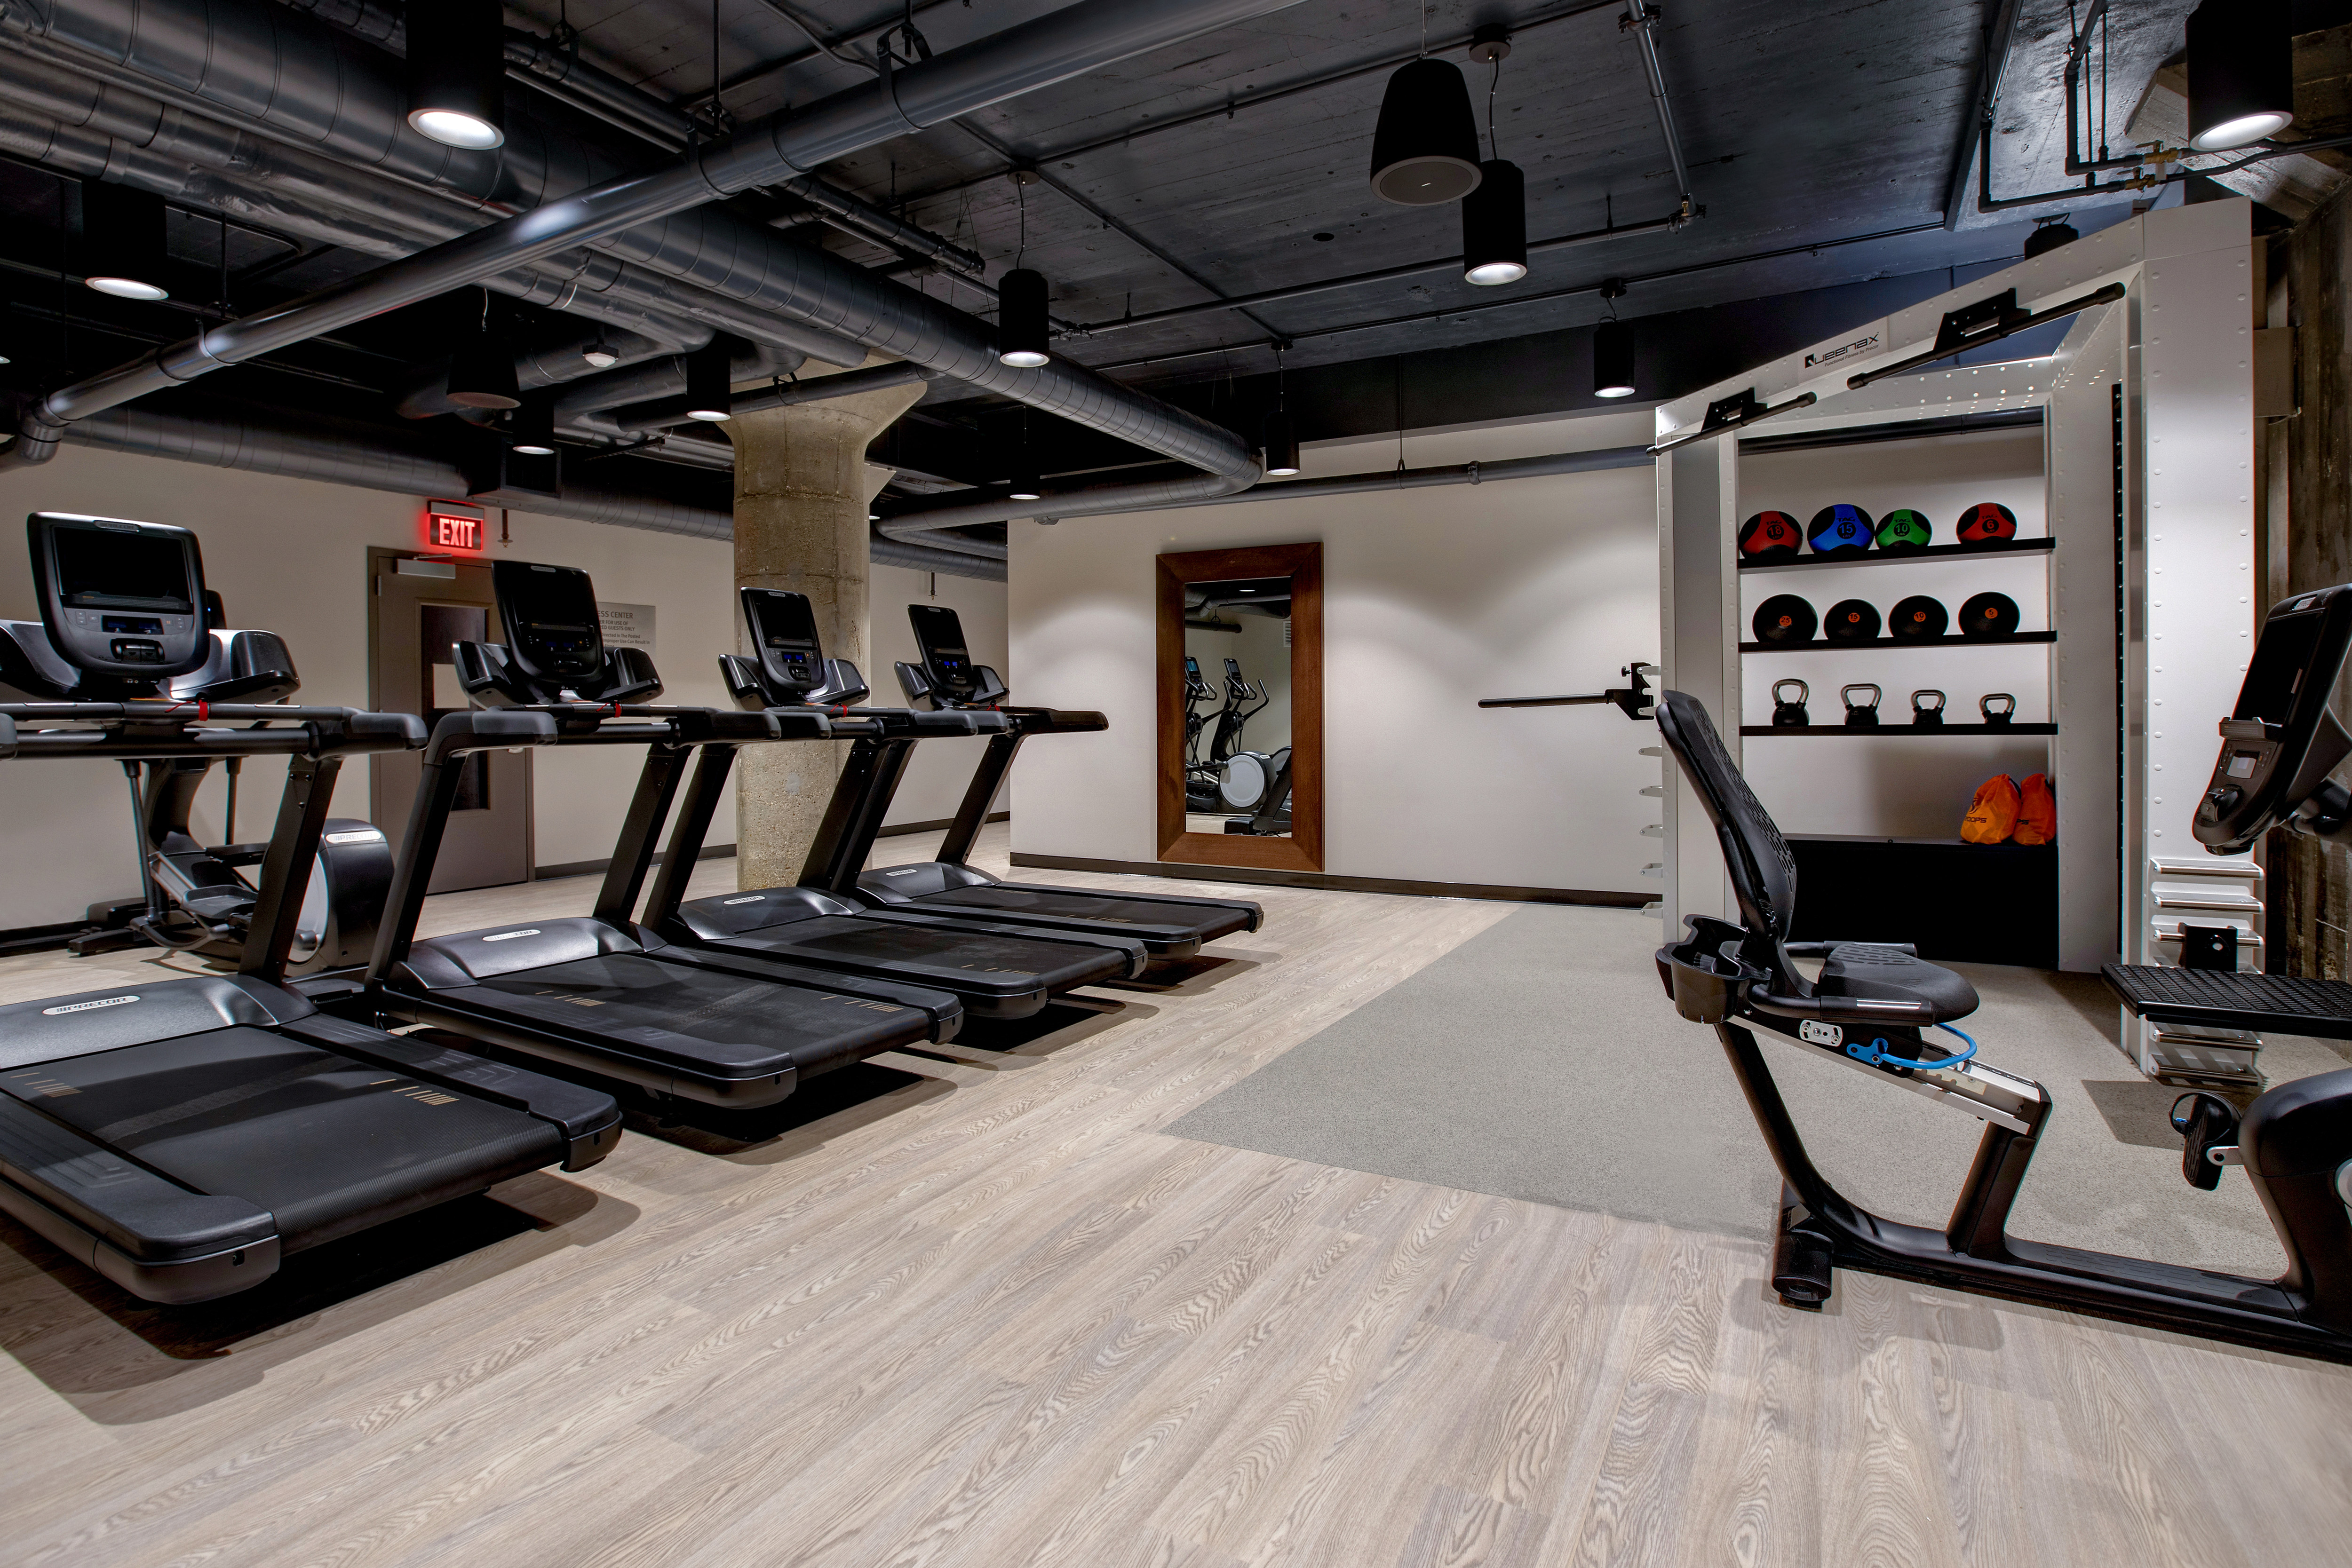 fitness center with exercise machines and weights